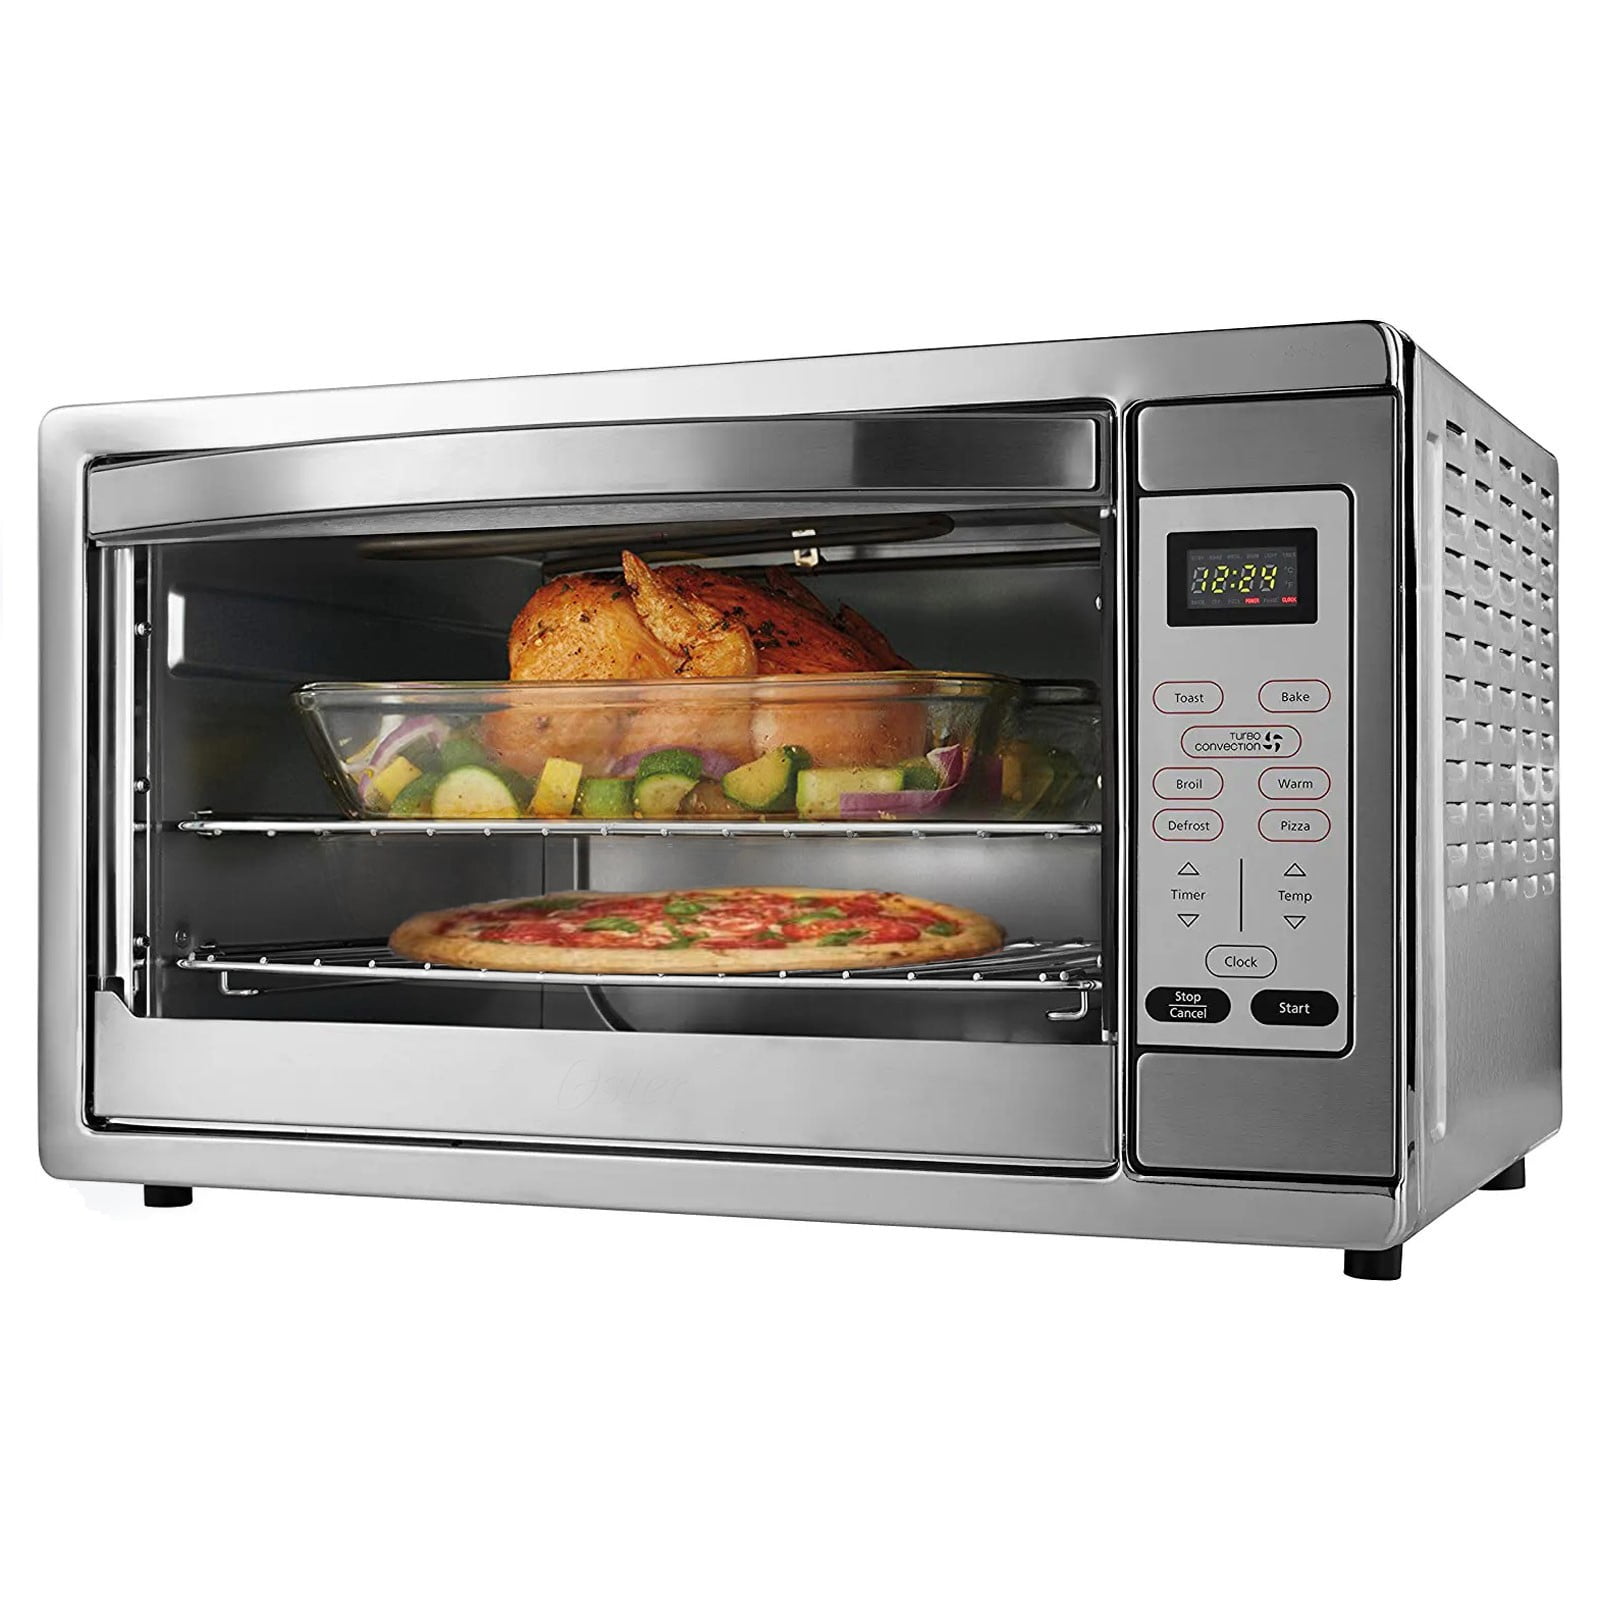 Home Kitchen 19QT Countertop Convection Toaster Oven Air Fryer Combo, Cream  White 